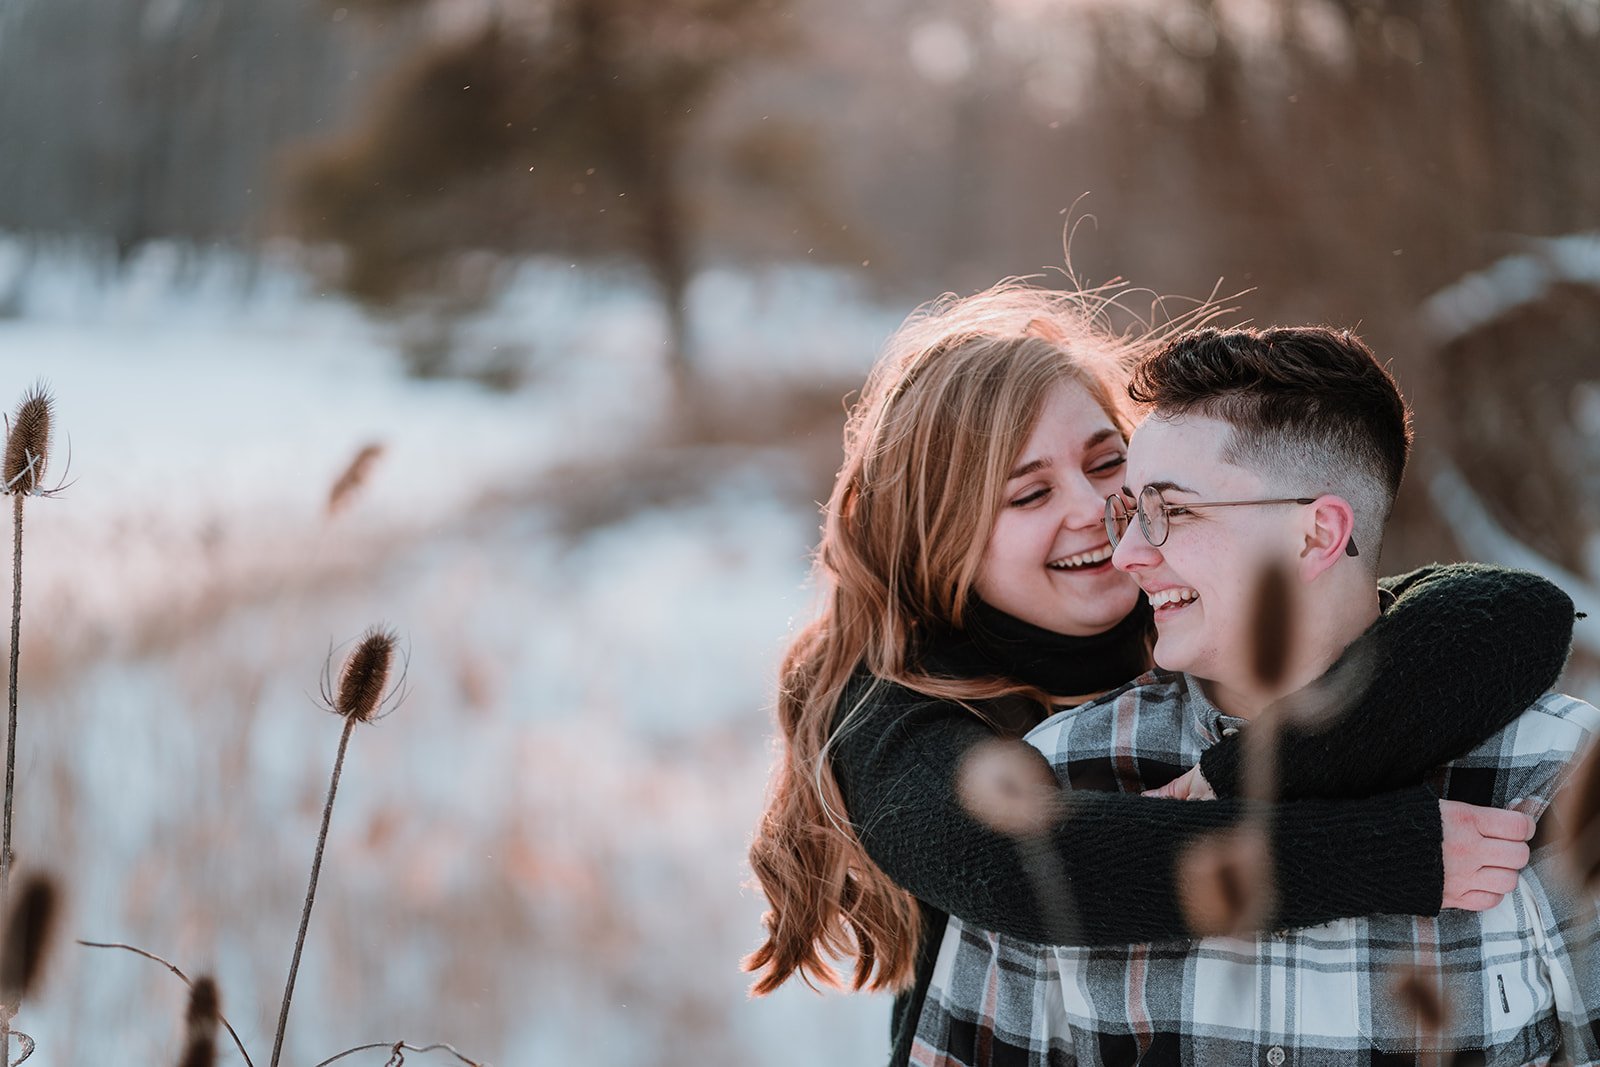 Sophia and Gabi Engagement Session at Reinstein Woods Nature Preserve in Buffalo NY by Stefan Ludwig Photography-87_websize.jpg